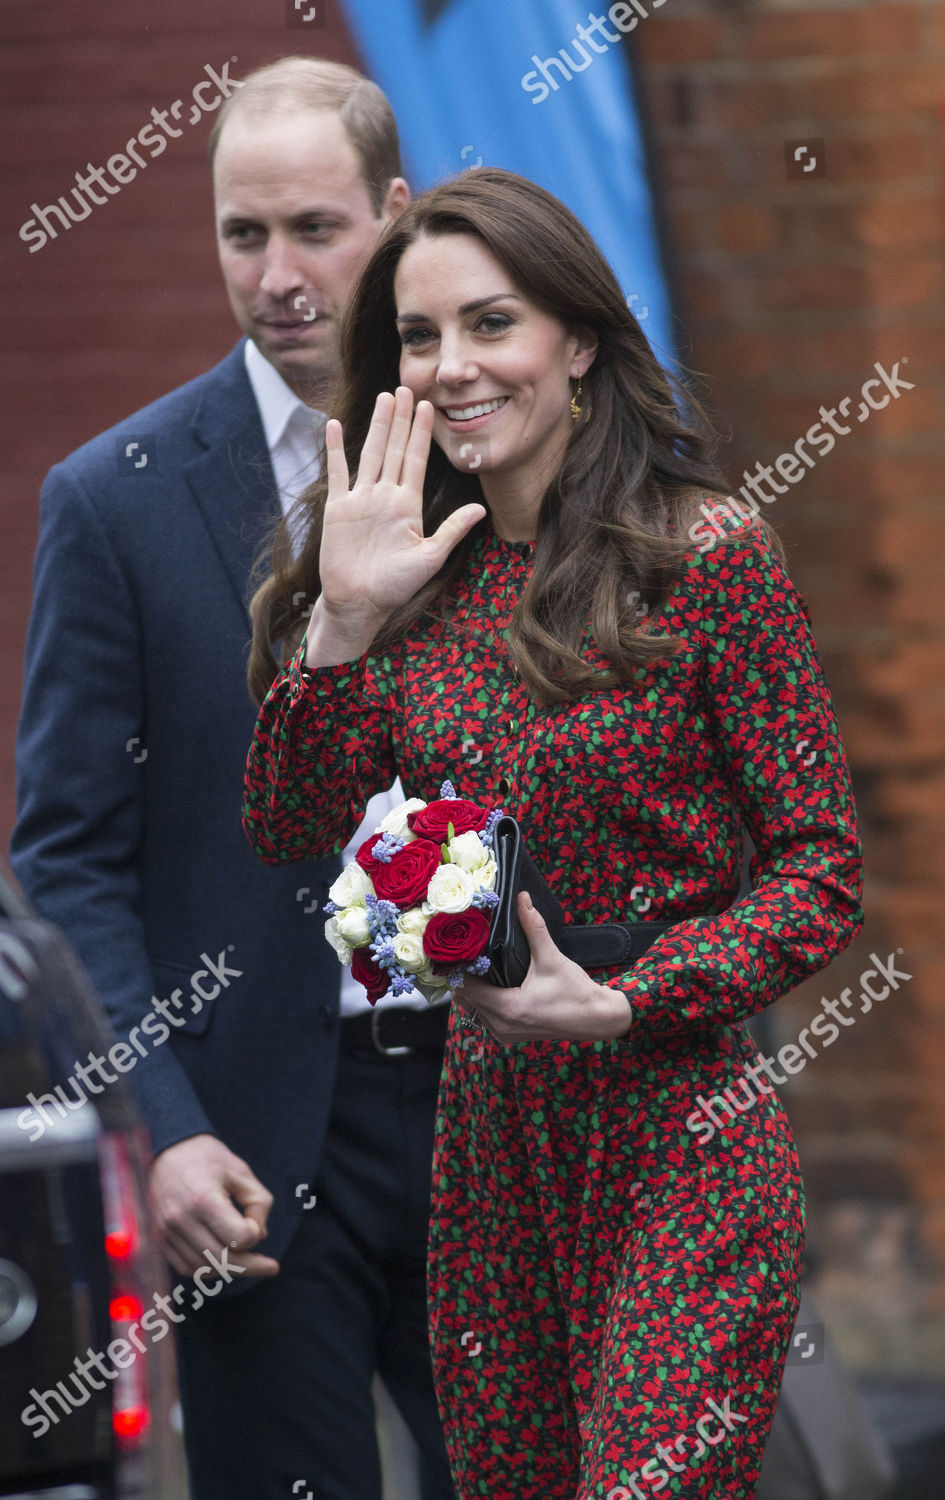 royal-visit-to-youth-support-service-the-mix-london-uk-shutterstock-editorial-7583001t.jpg